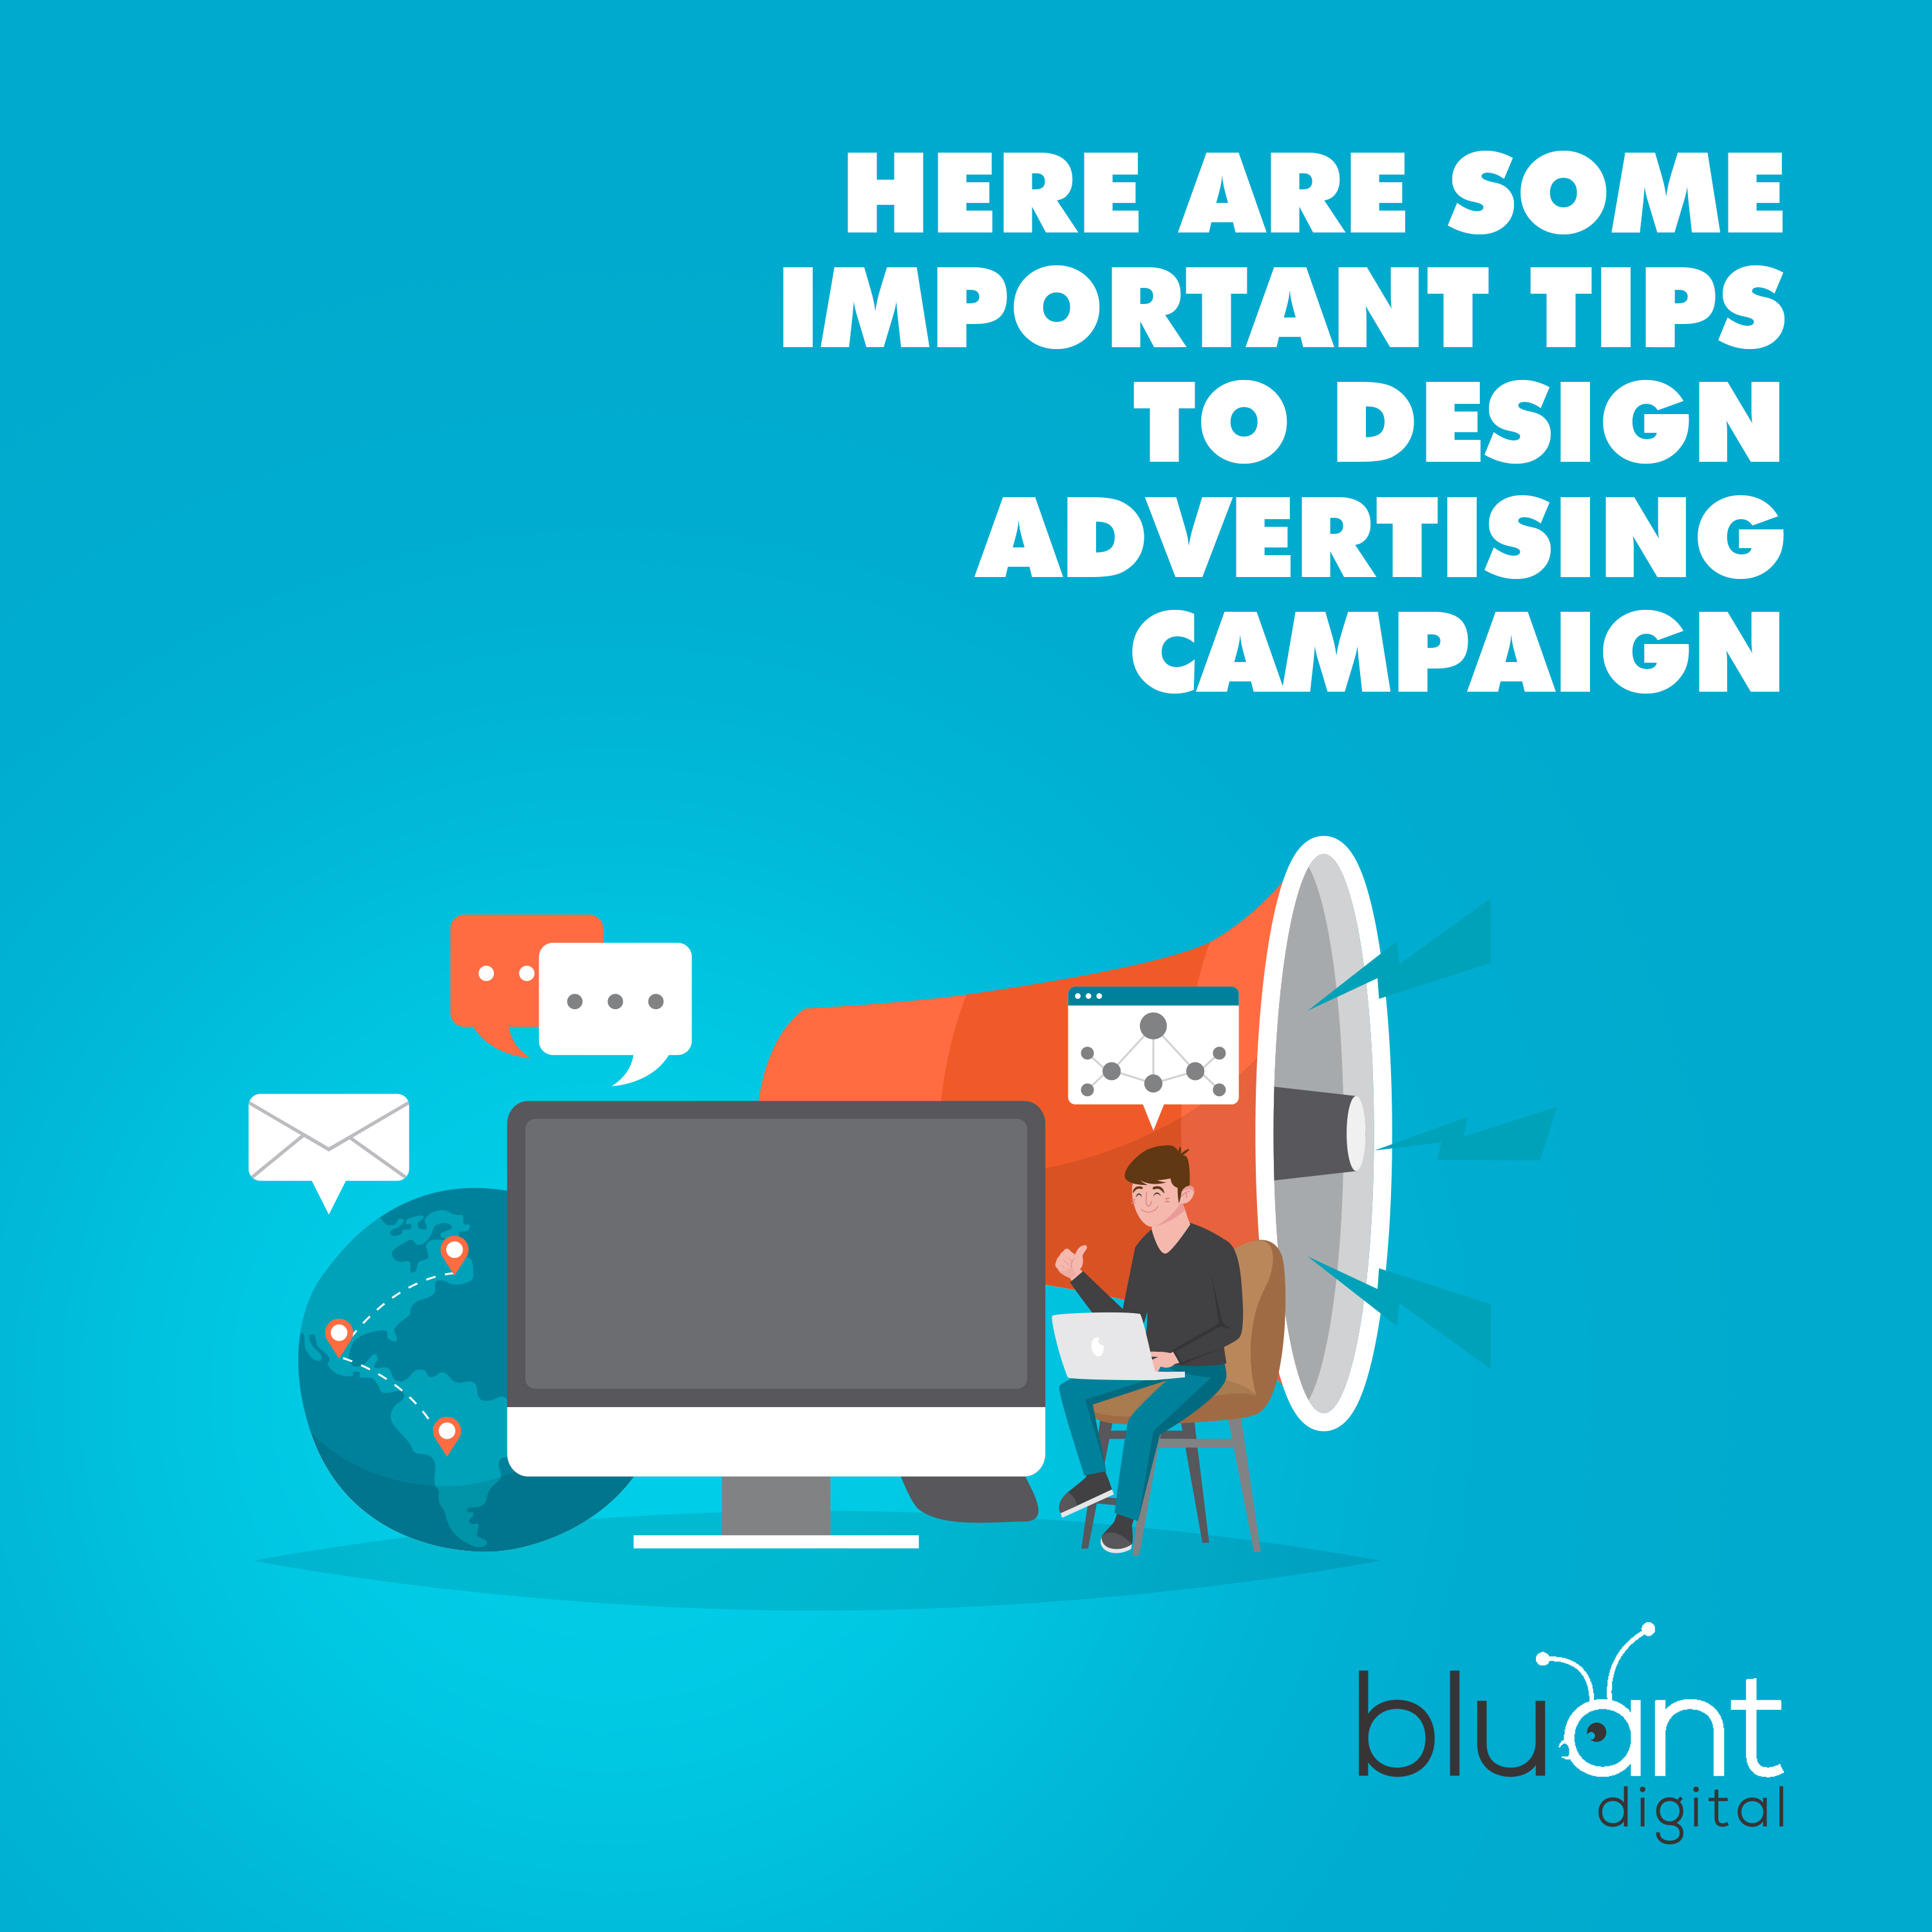 Here are Some Important Tips To Design Advertising Campaigns